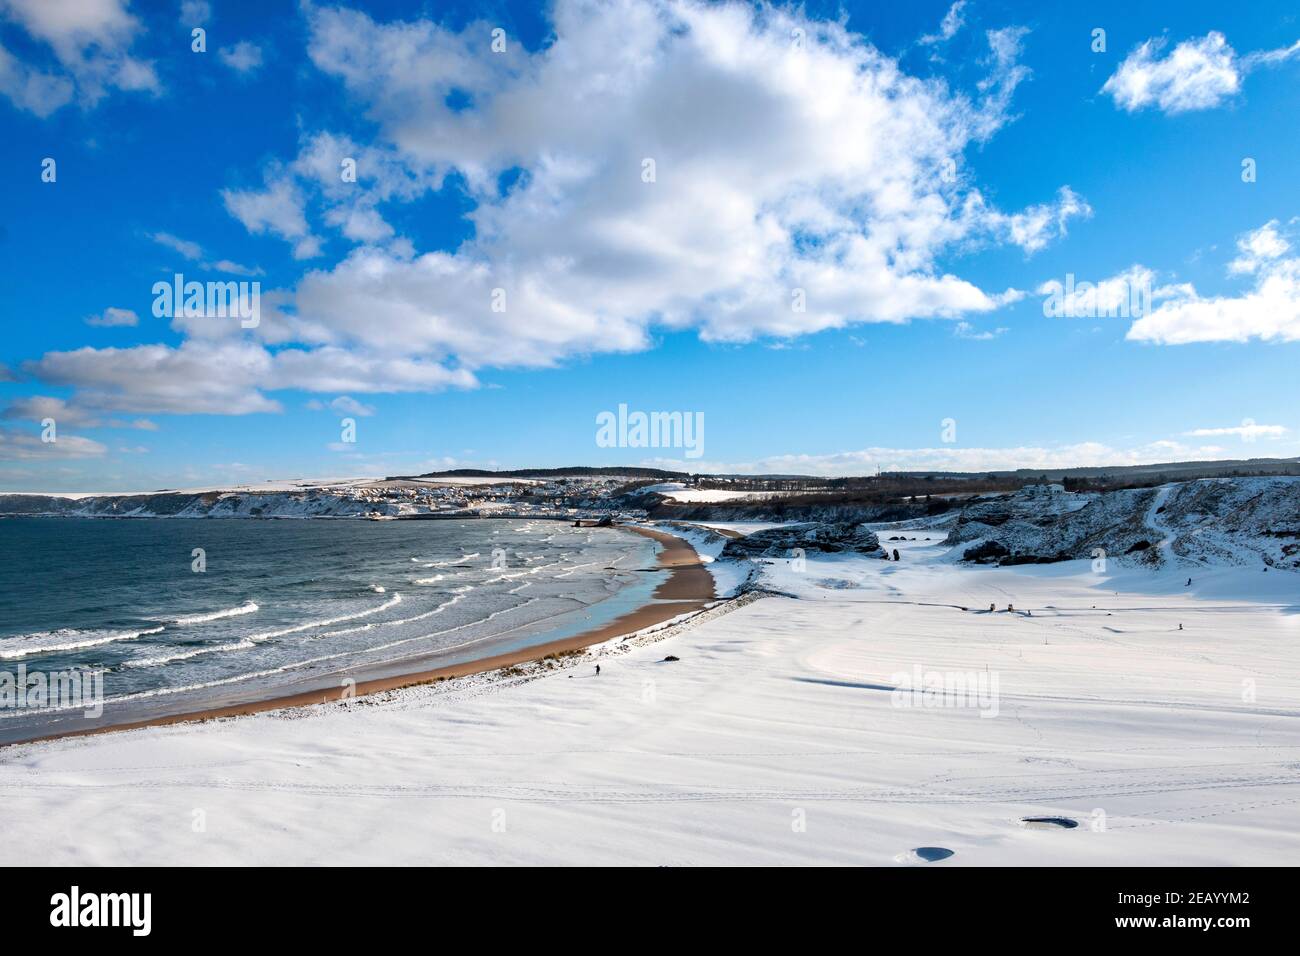 CULLEN BAY MORAY FIRTH SCOTLAND A BLUE SKY IN WINTER SNOW COVERING THE GOLF  COURSE TOWN HOUSES AND SANDY BEACH Stock Photo - Alamy